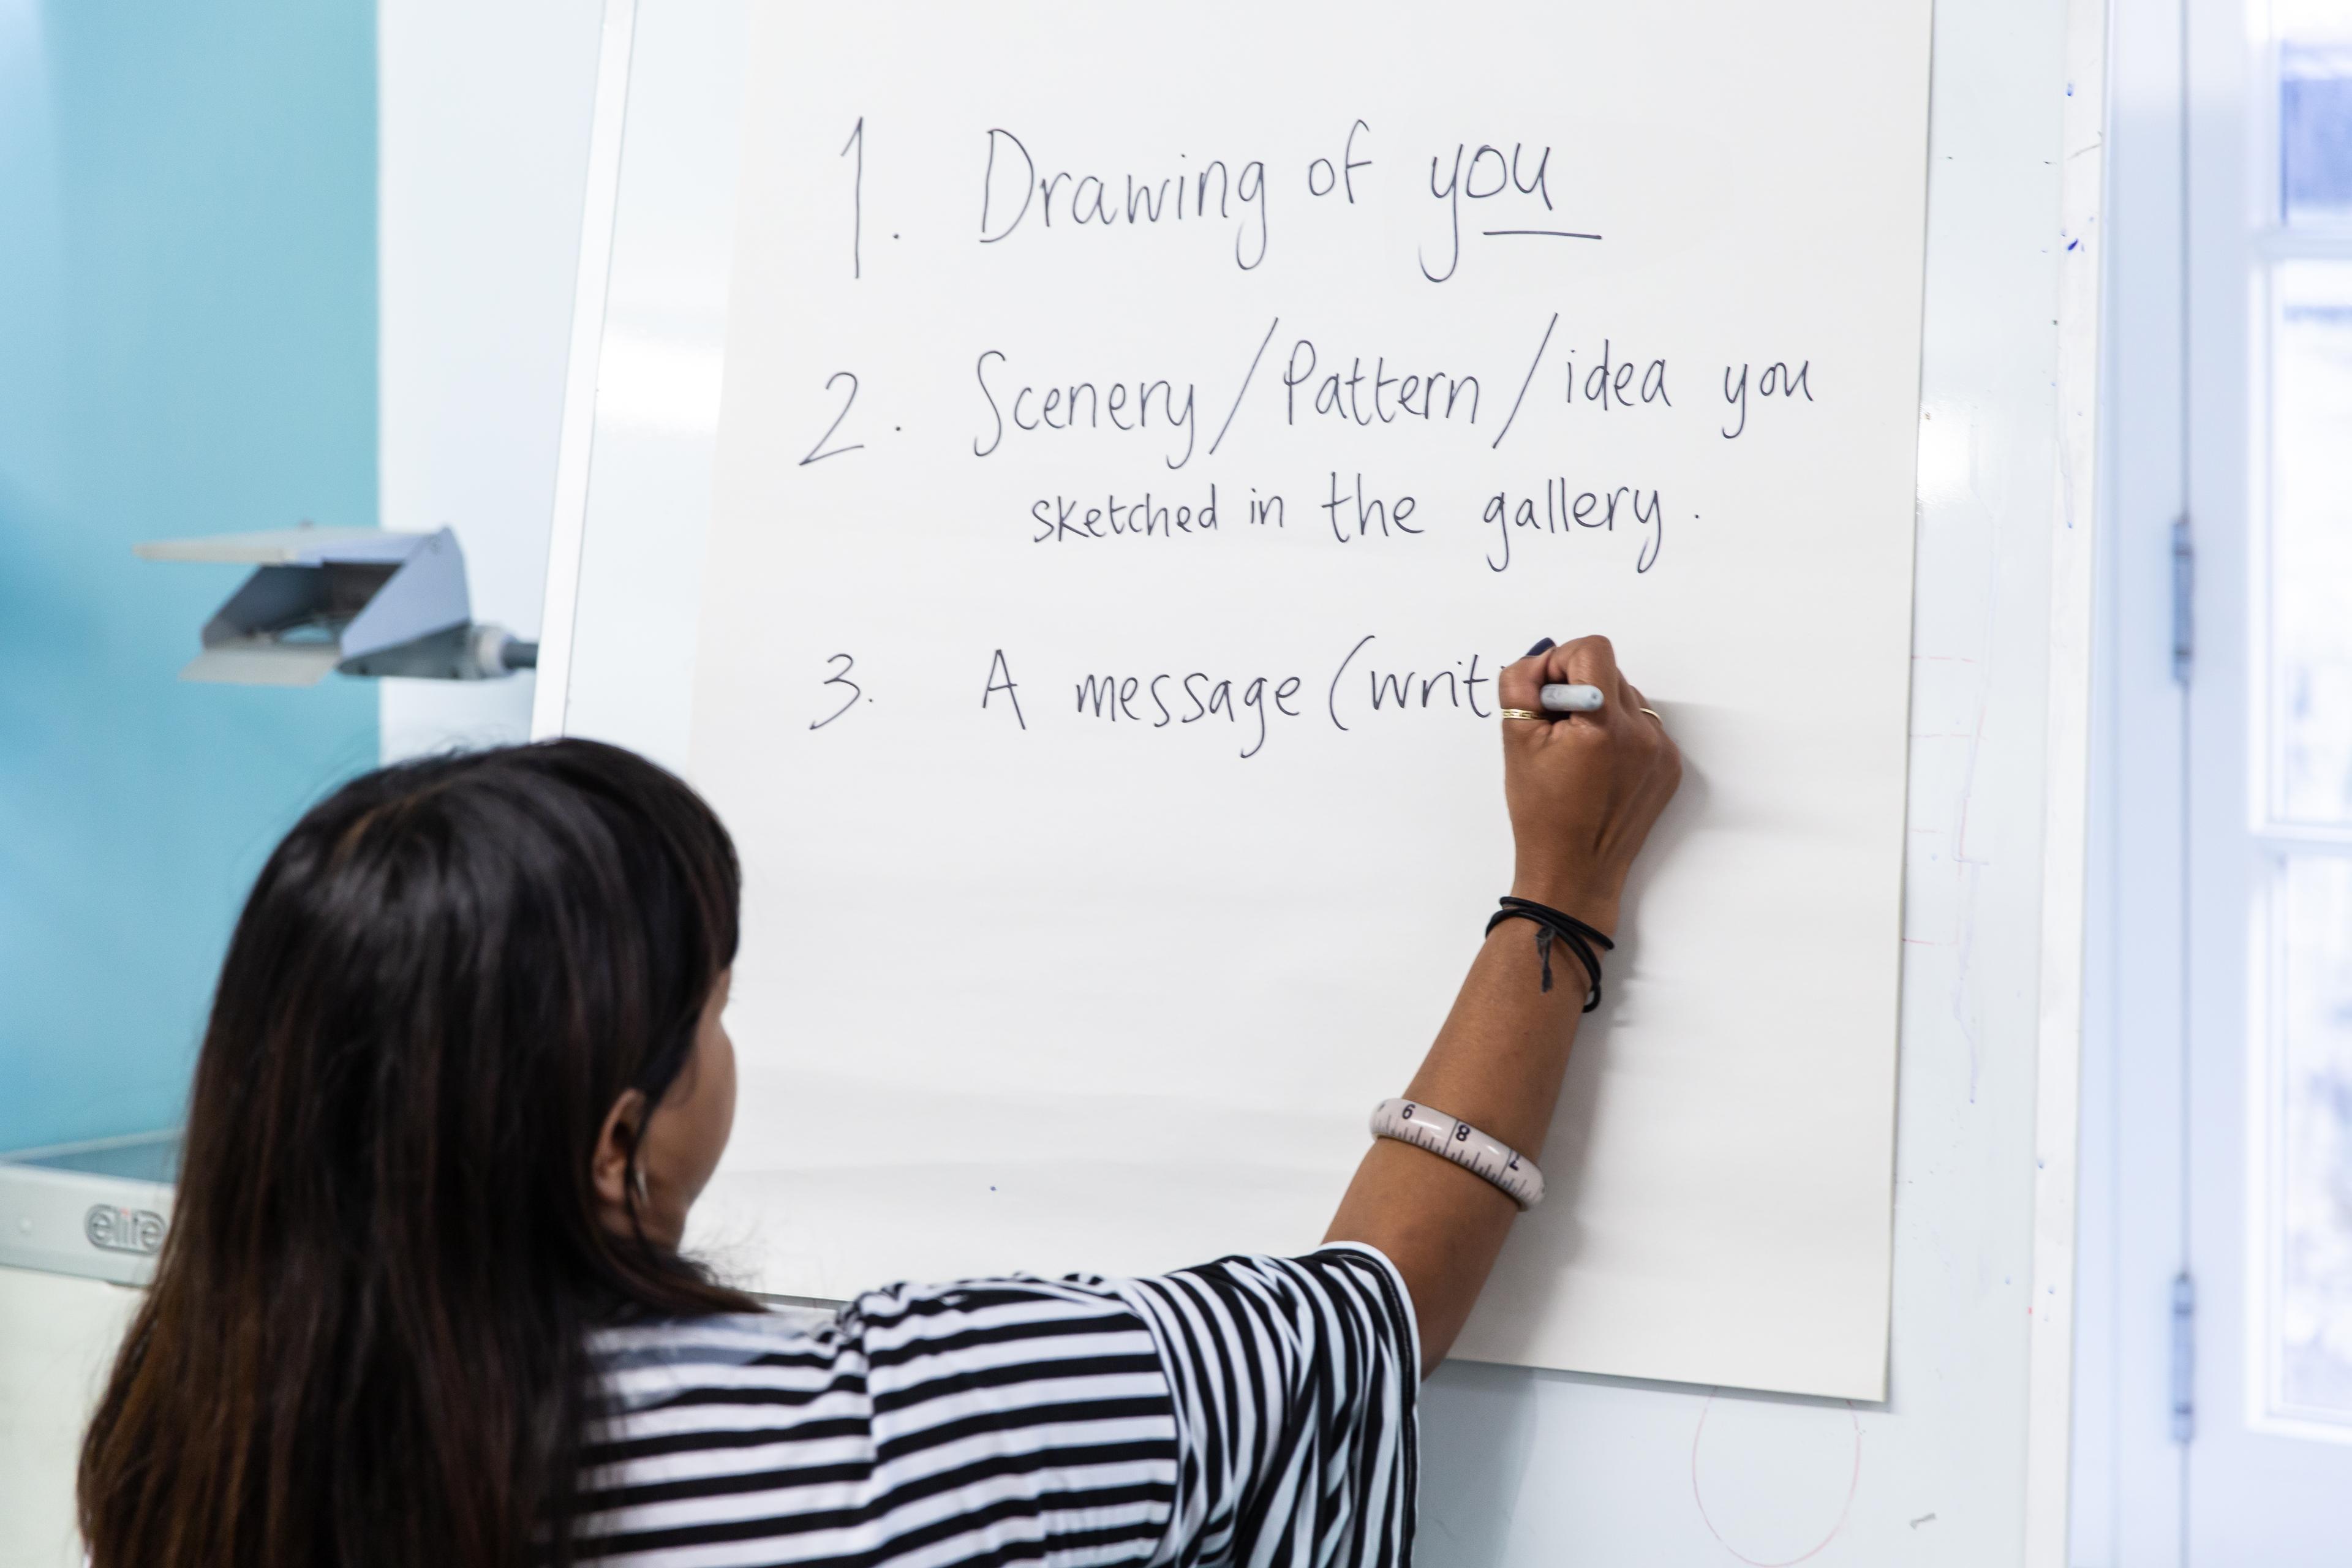 Photograph of person writing activity instructions on flipchart paper